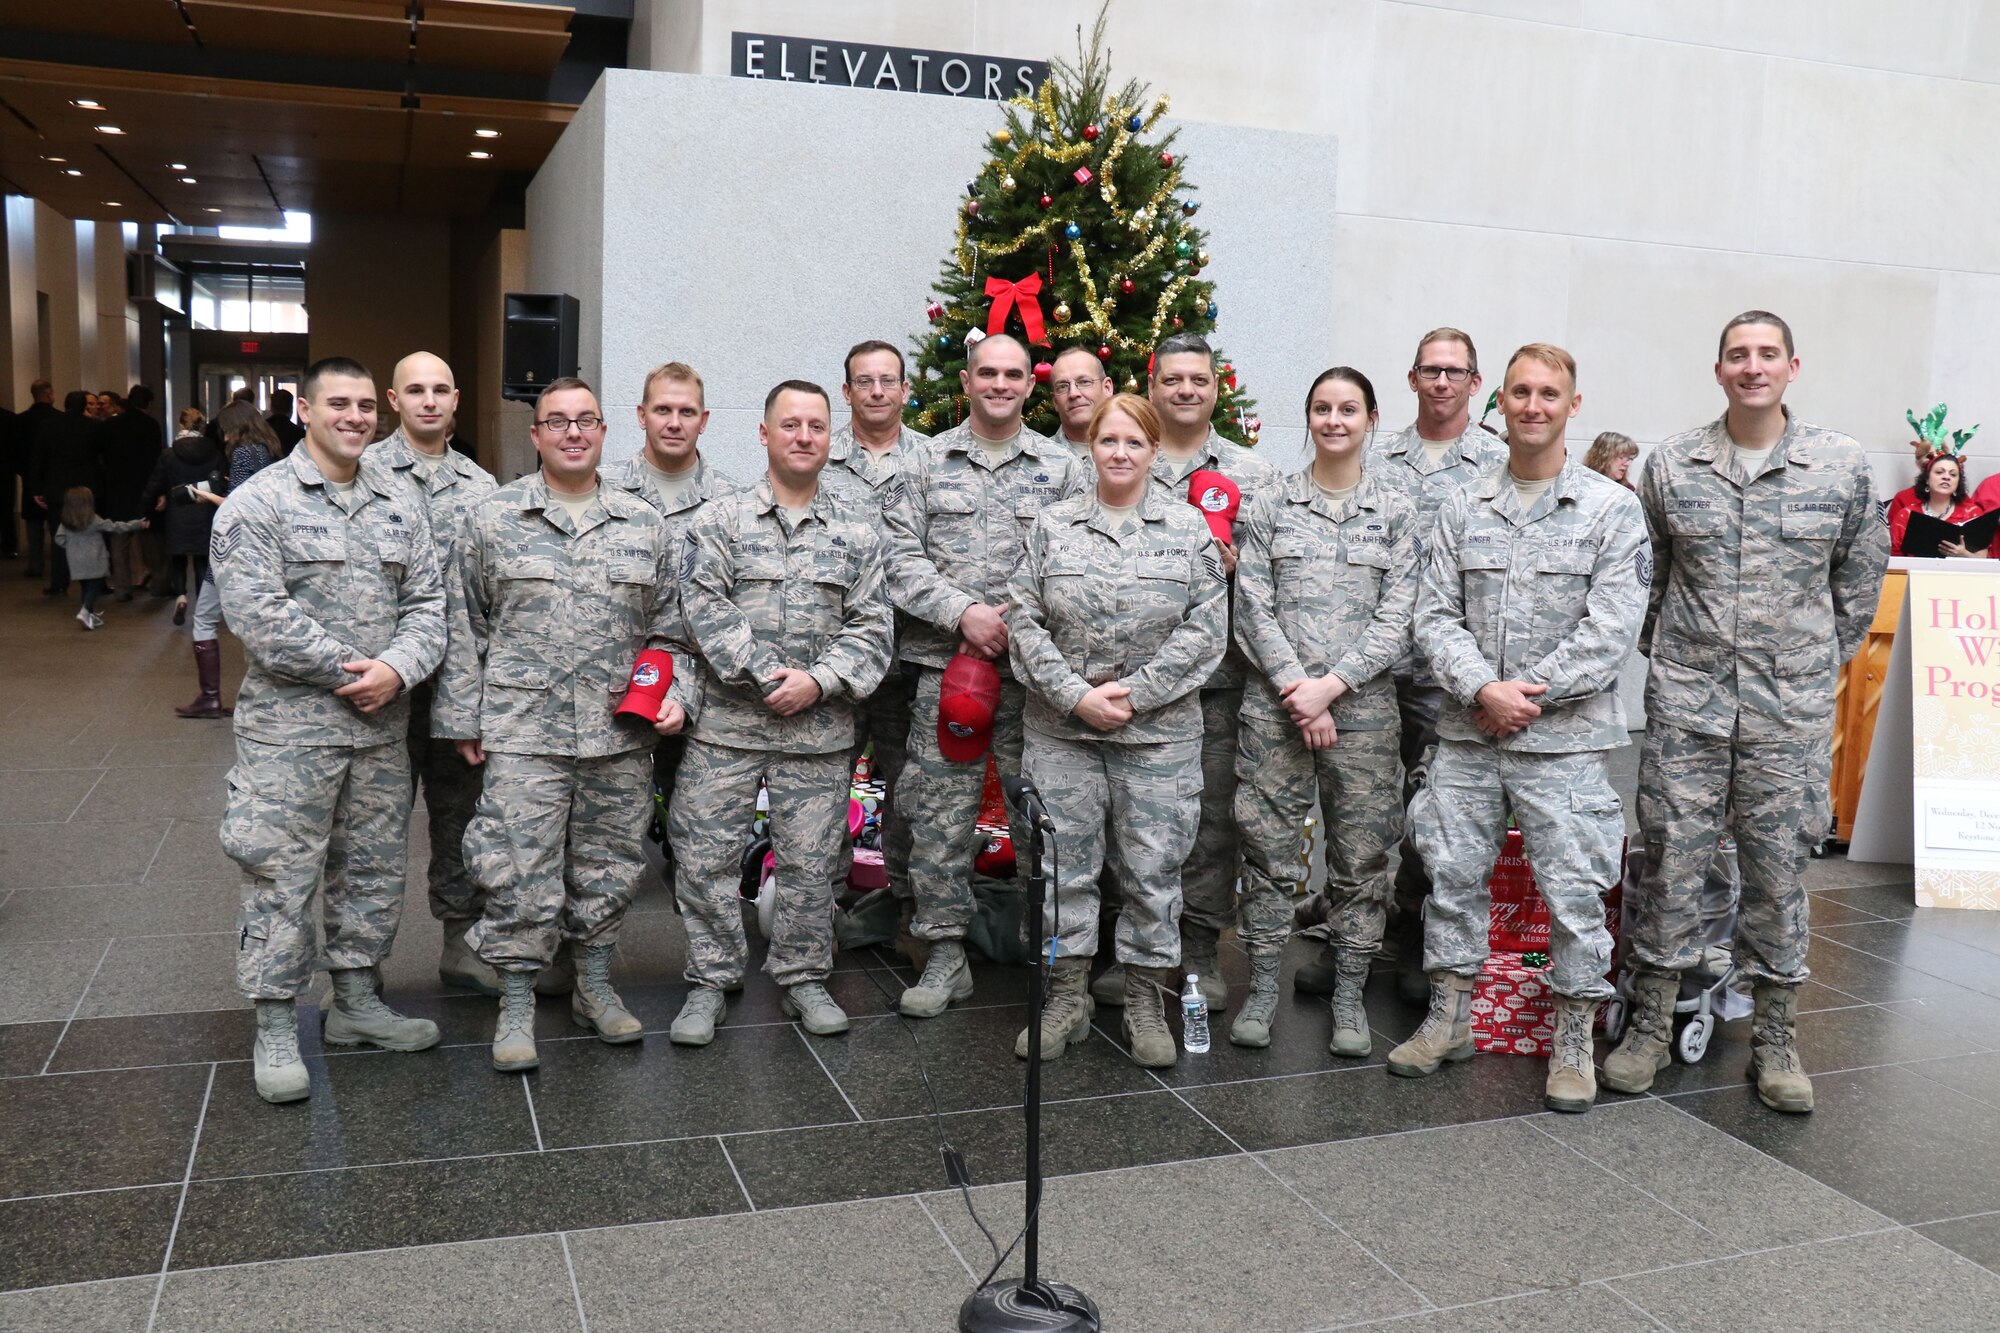 Before loading donated gifts into military vehicles, 193rd Regional Support Group Airmen, pose for a group photo during the 28th annual Holiday Wish Program held at the Keystone Building, Harrisburg, Pennsylvania, Dec. 6, 2017. The Airmen along with Pennsylvania Army Guardsmen delivered the gifts to participating county assistance offices for distribution to families and individuals.  (U.S. Air National Guard photo by Master Sgt. Culeen Shaffer/Released)